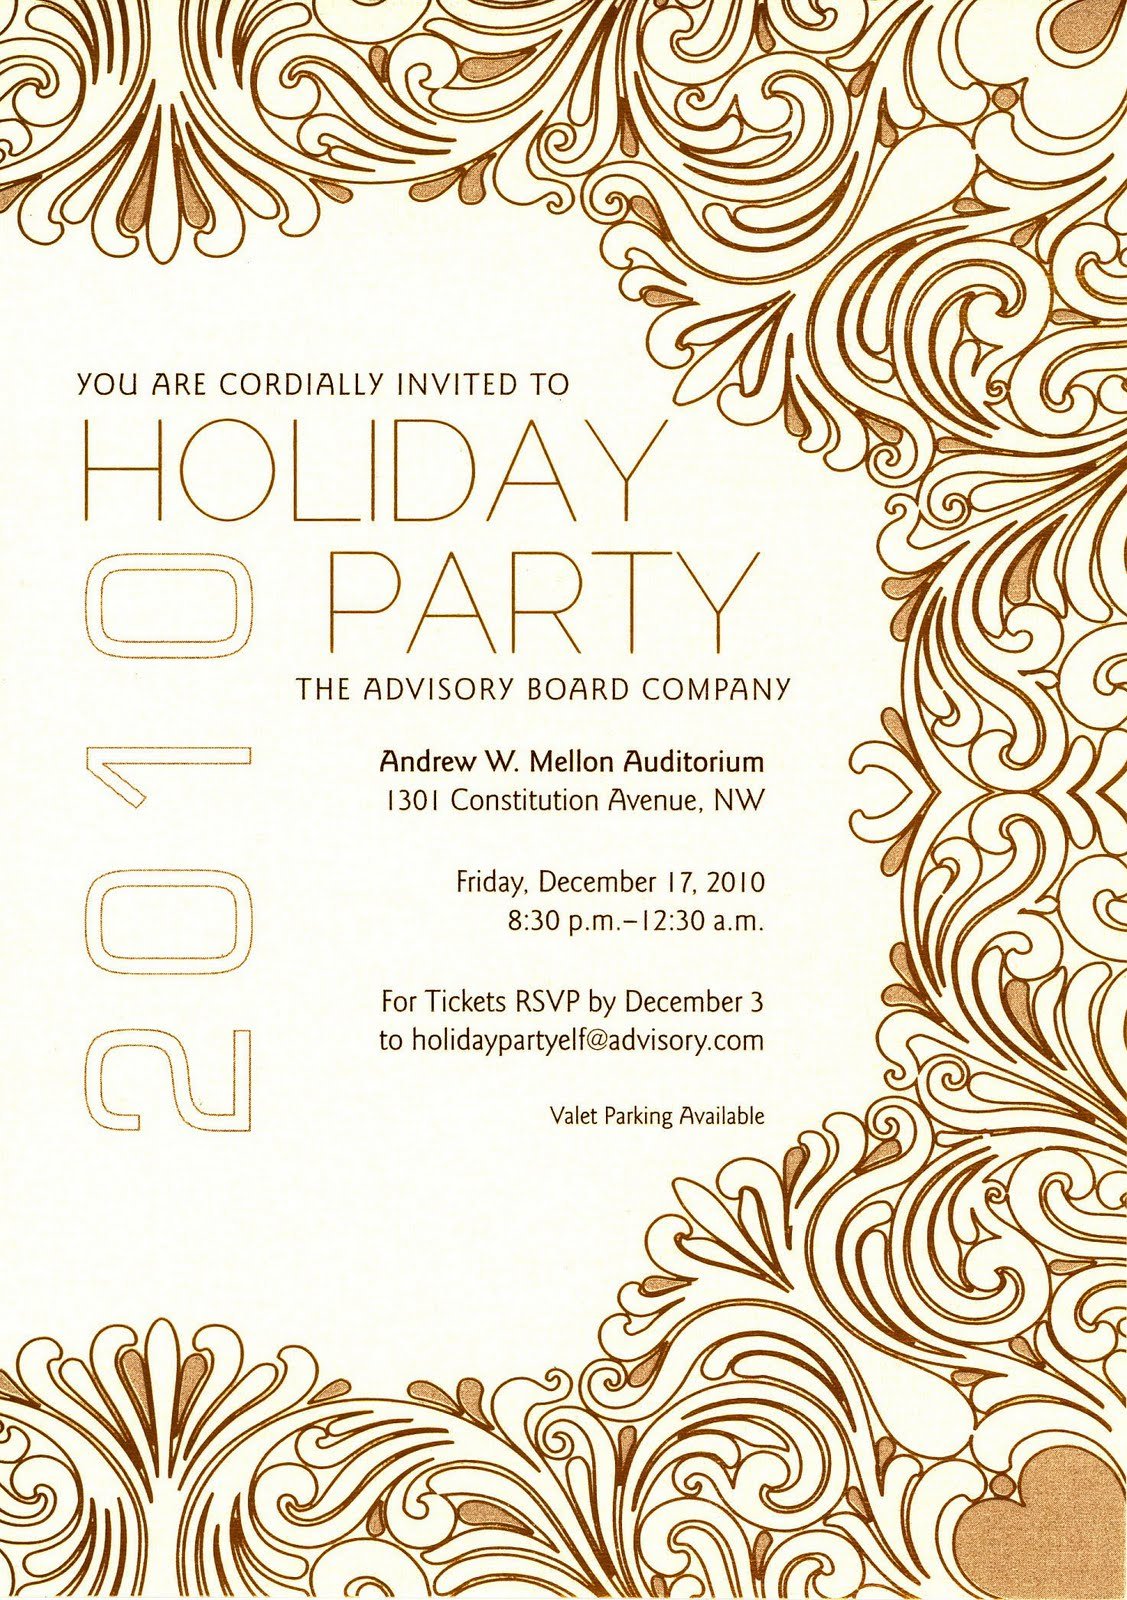 Office Christmas Party Invitations